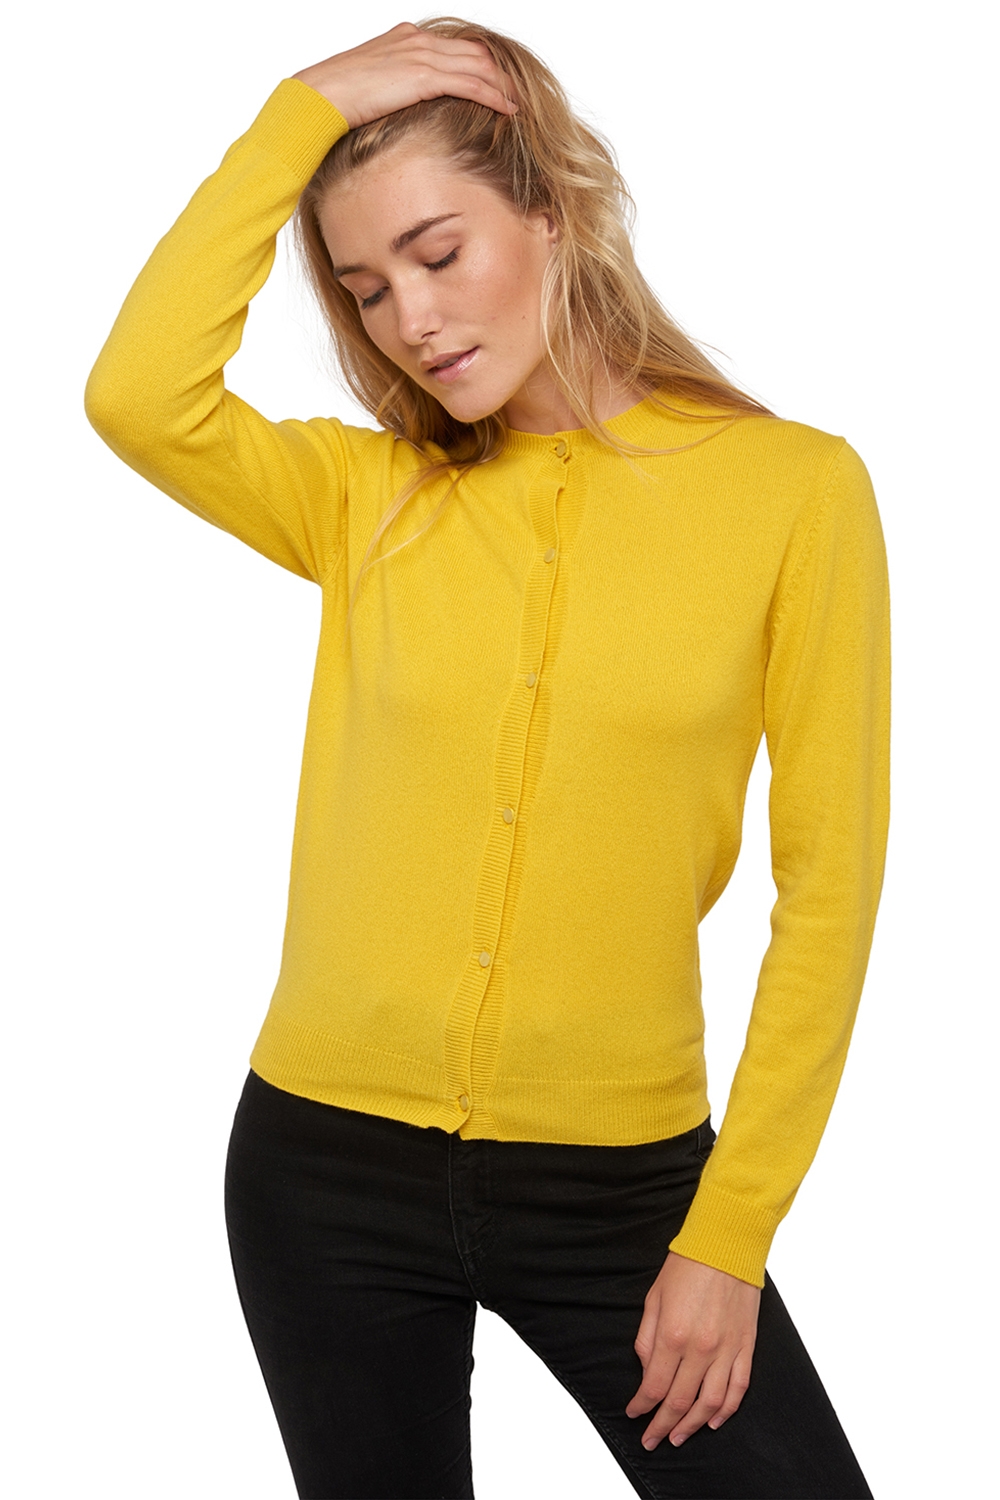 Cashmere ladies basic sweaters at low prices tyra first sunny yellow s